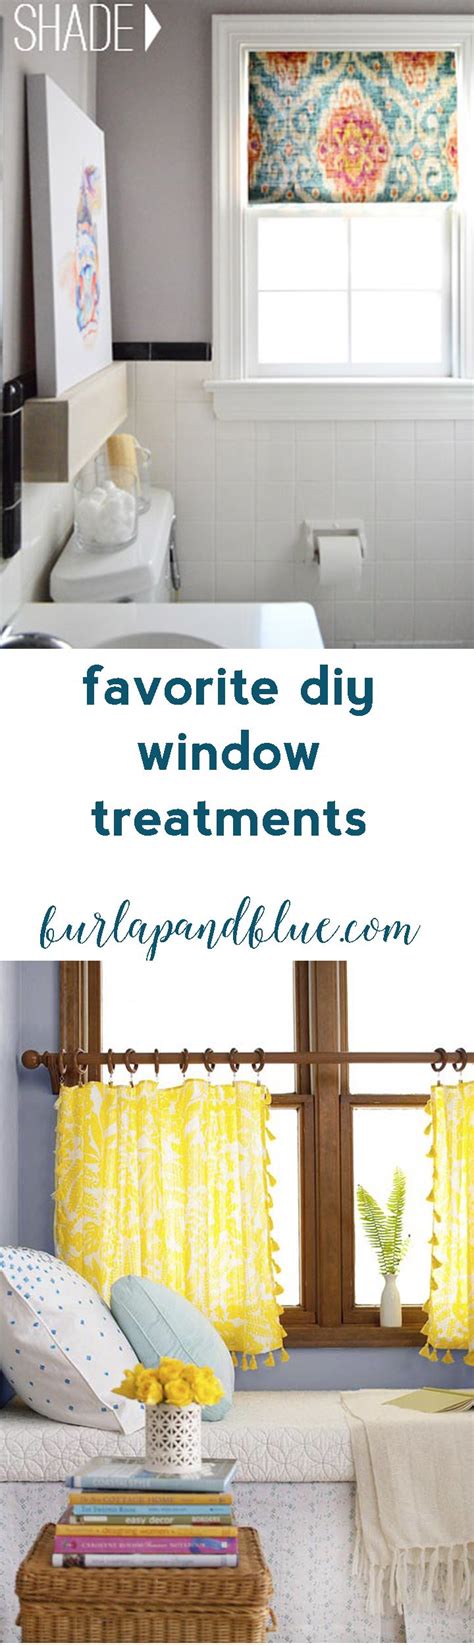 Want To Diy Your Own Window Treatments Start Here My Favorite Diy